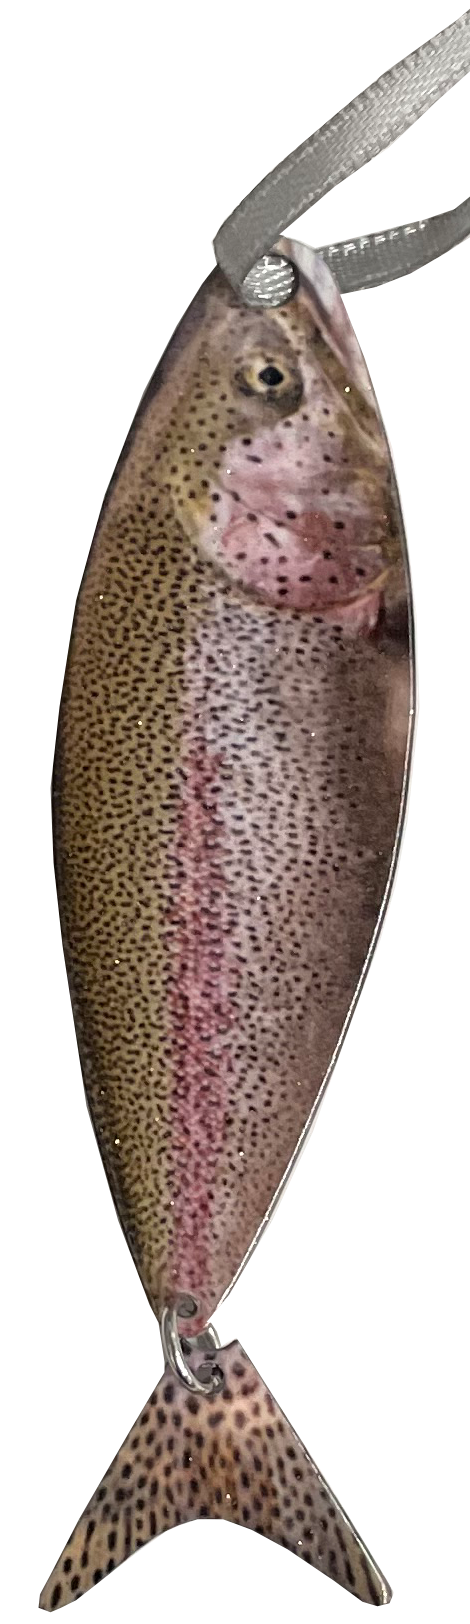 Rainbow Trout Ornament 4 inch #8344 by d'ears